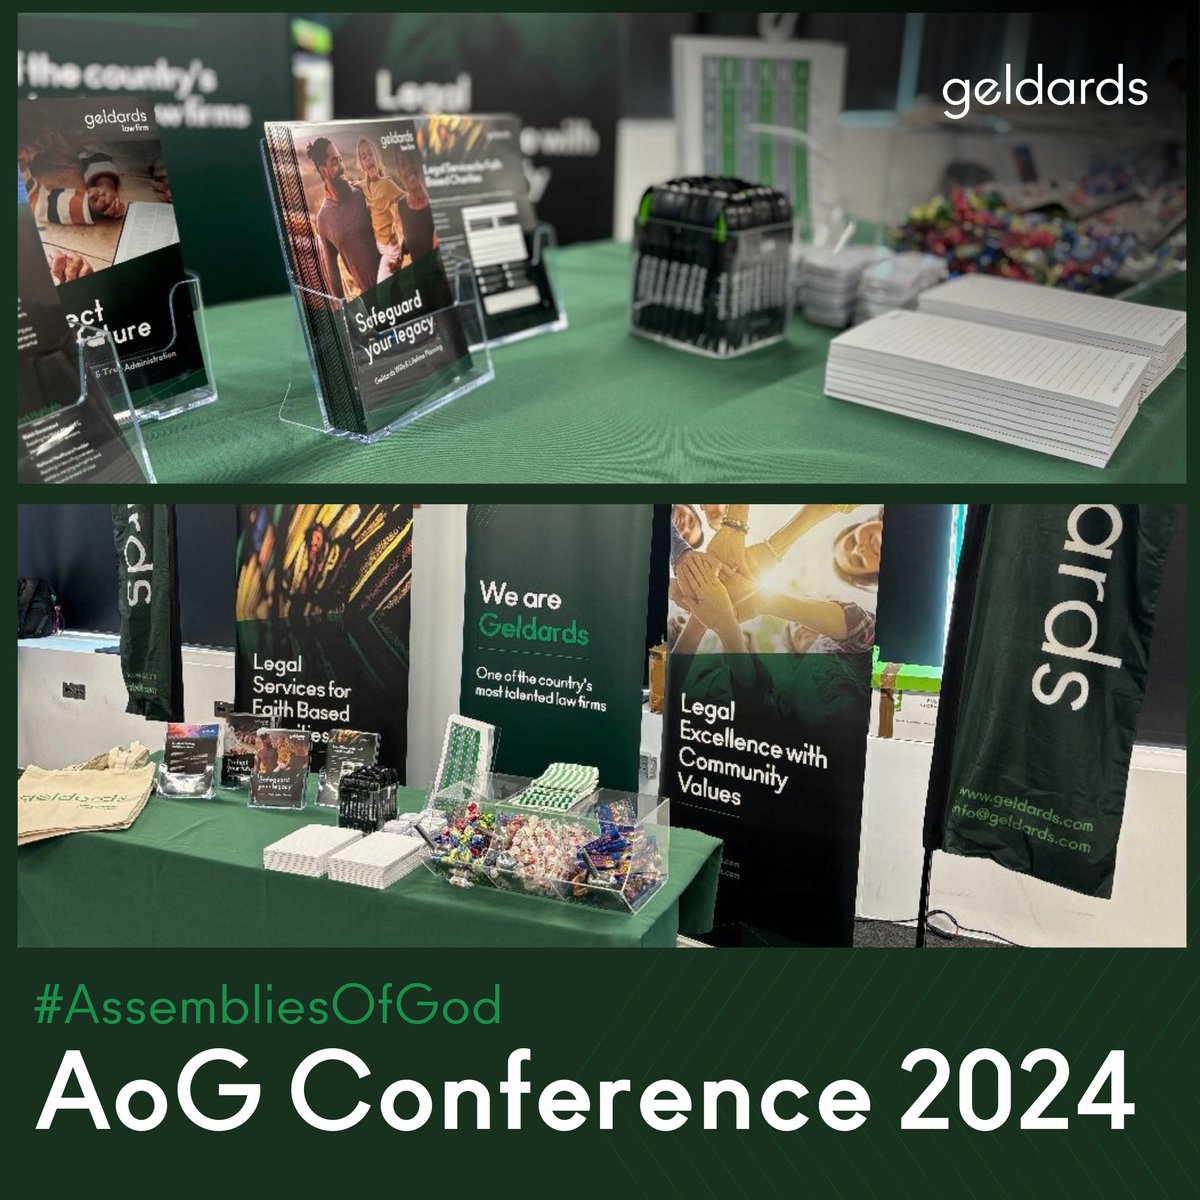 Our Geldards teams are delighted to be attending the #AssembliesOfGod 2024 conference! Don't forget to come and say hello to us at our Geldards stand! 👋 #AoG #assembliesofgodconference #charitylaw #privateclient #businessimmigration #governance #AoGConference